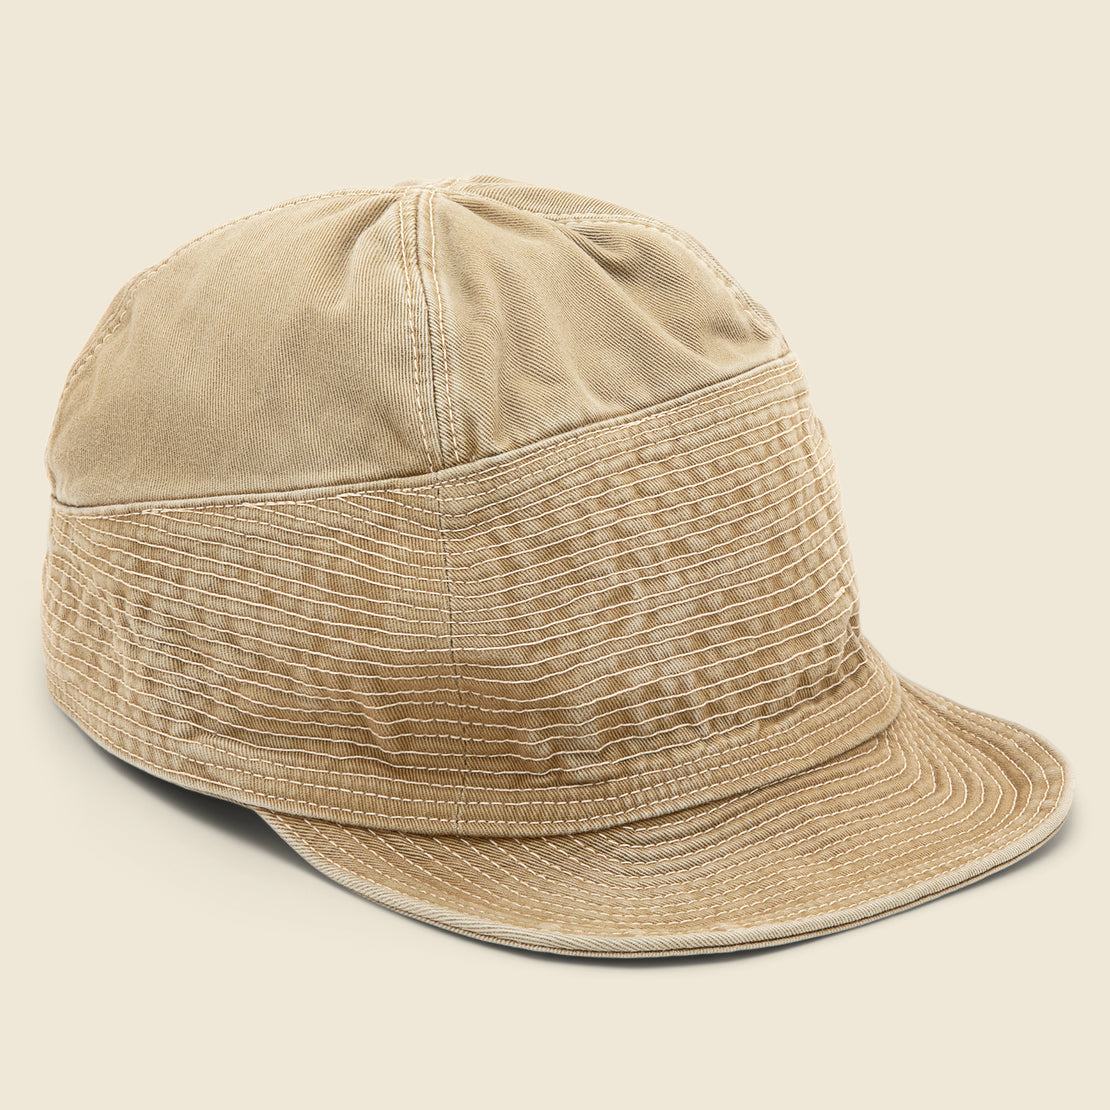 Kapital The Old Man and the Sea Chino Cap - Beige